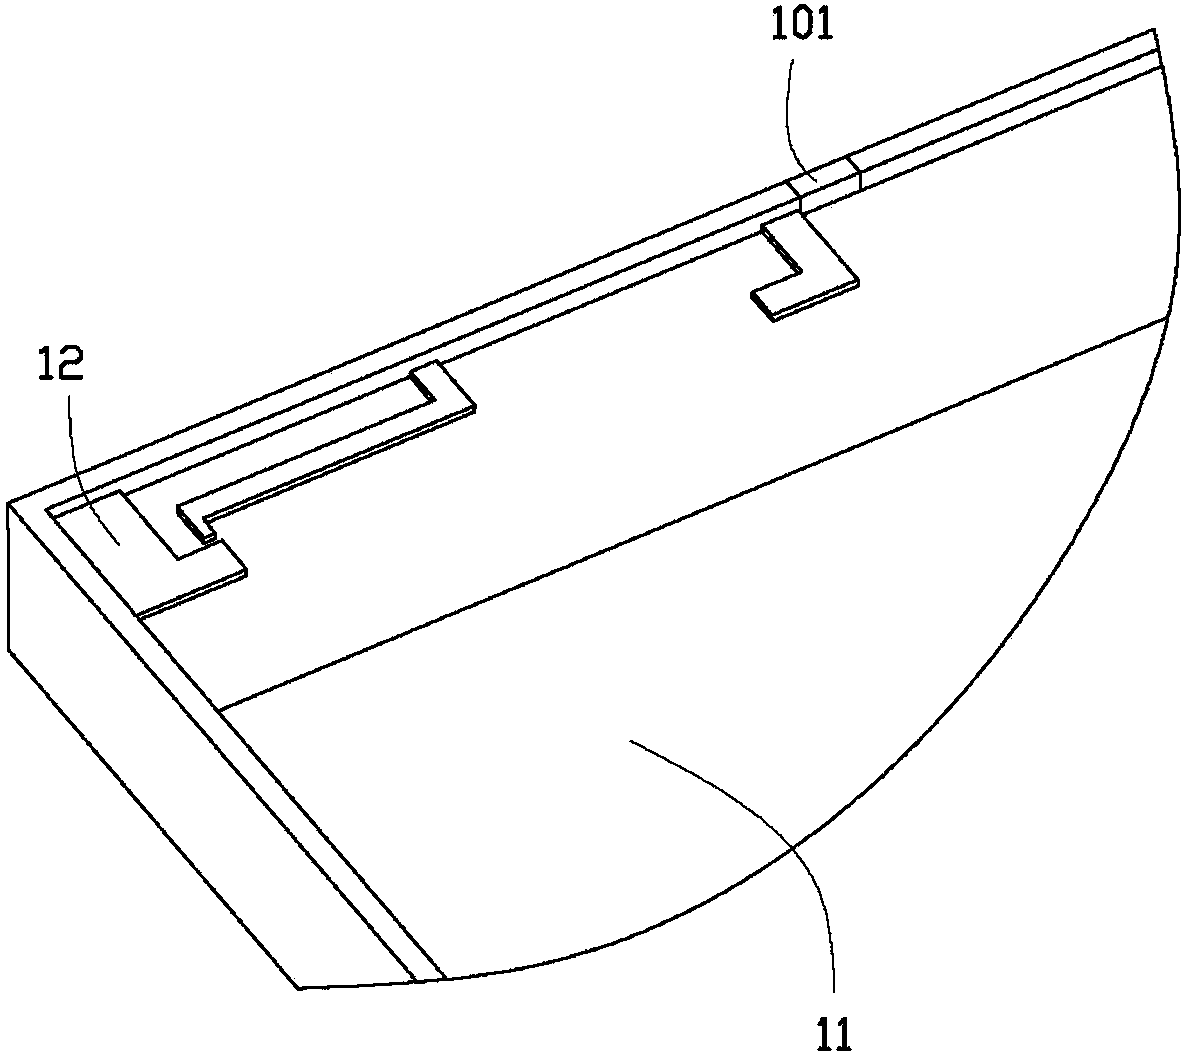 Antenna structure integrated in metal shell